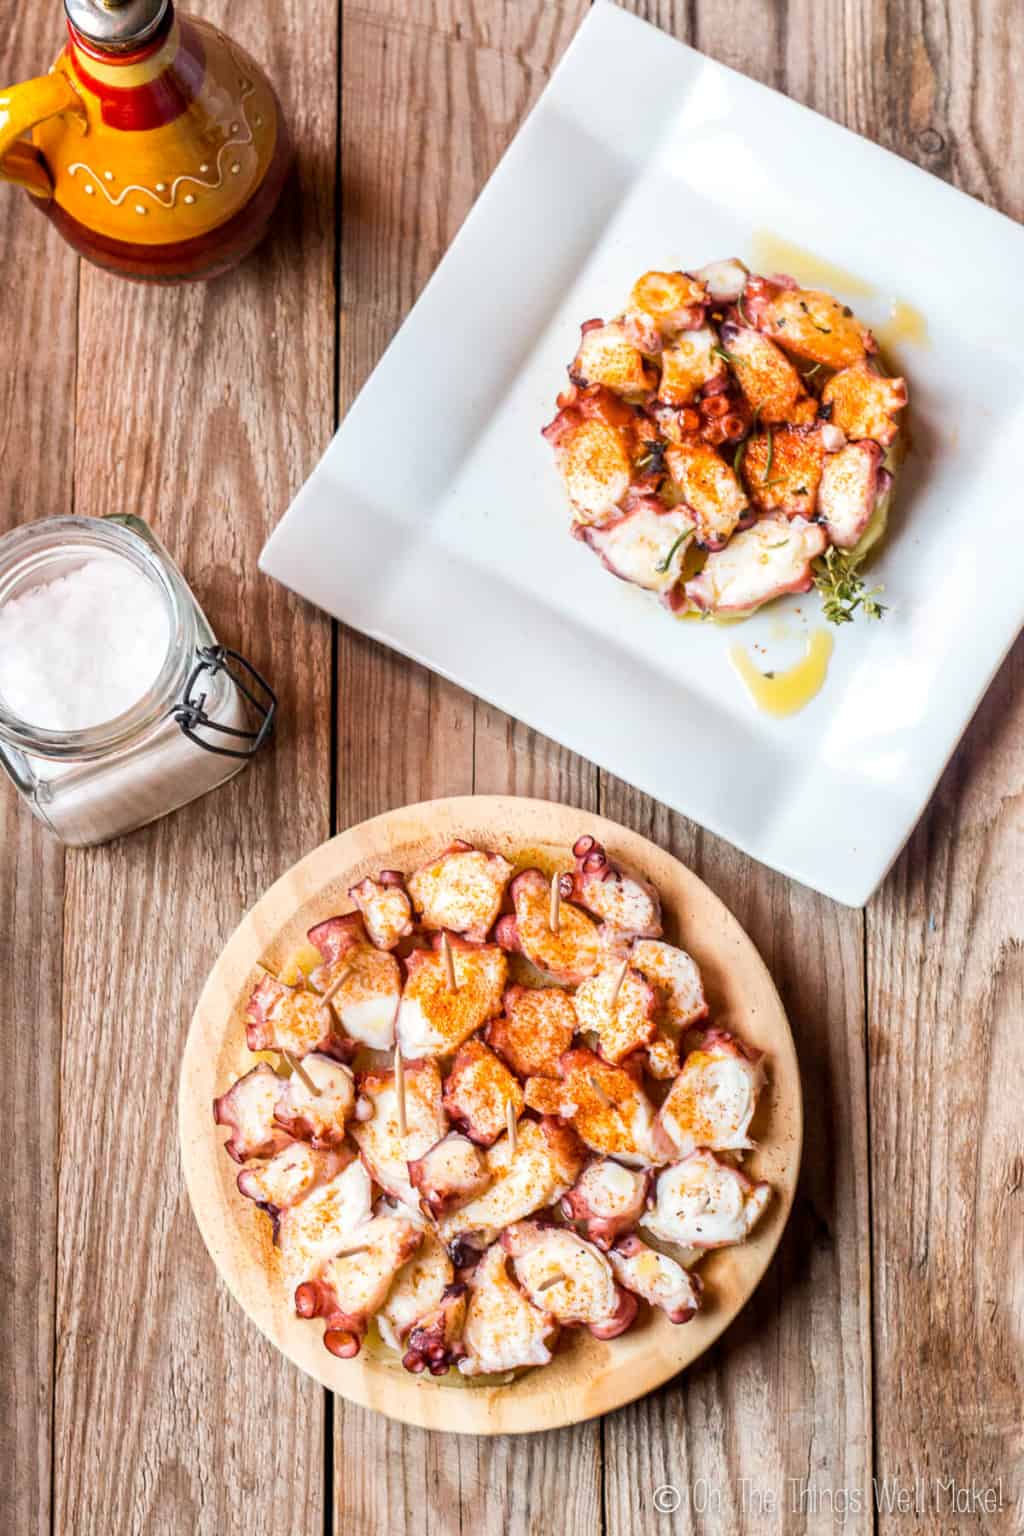 A white square plate with pulpo a la gallega, galician style octopus on top of slices of potato, garnished with paprika on the top. On the bottom is a circle plate full of pulpo a la gallega.